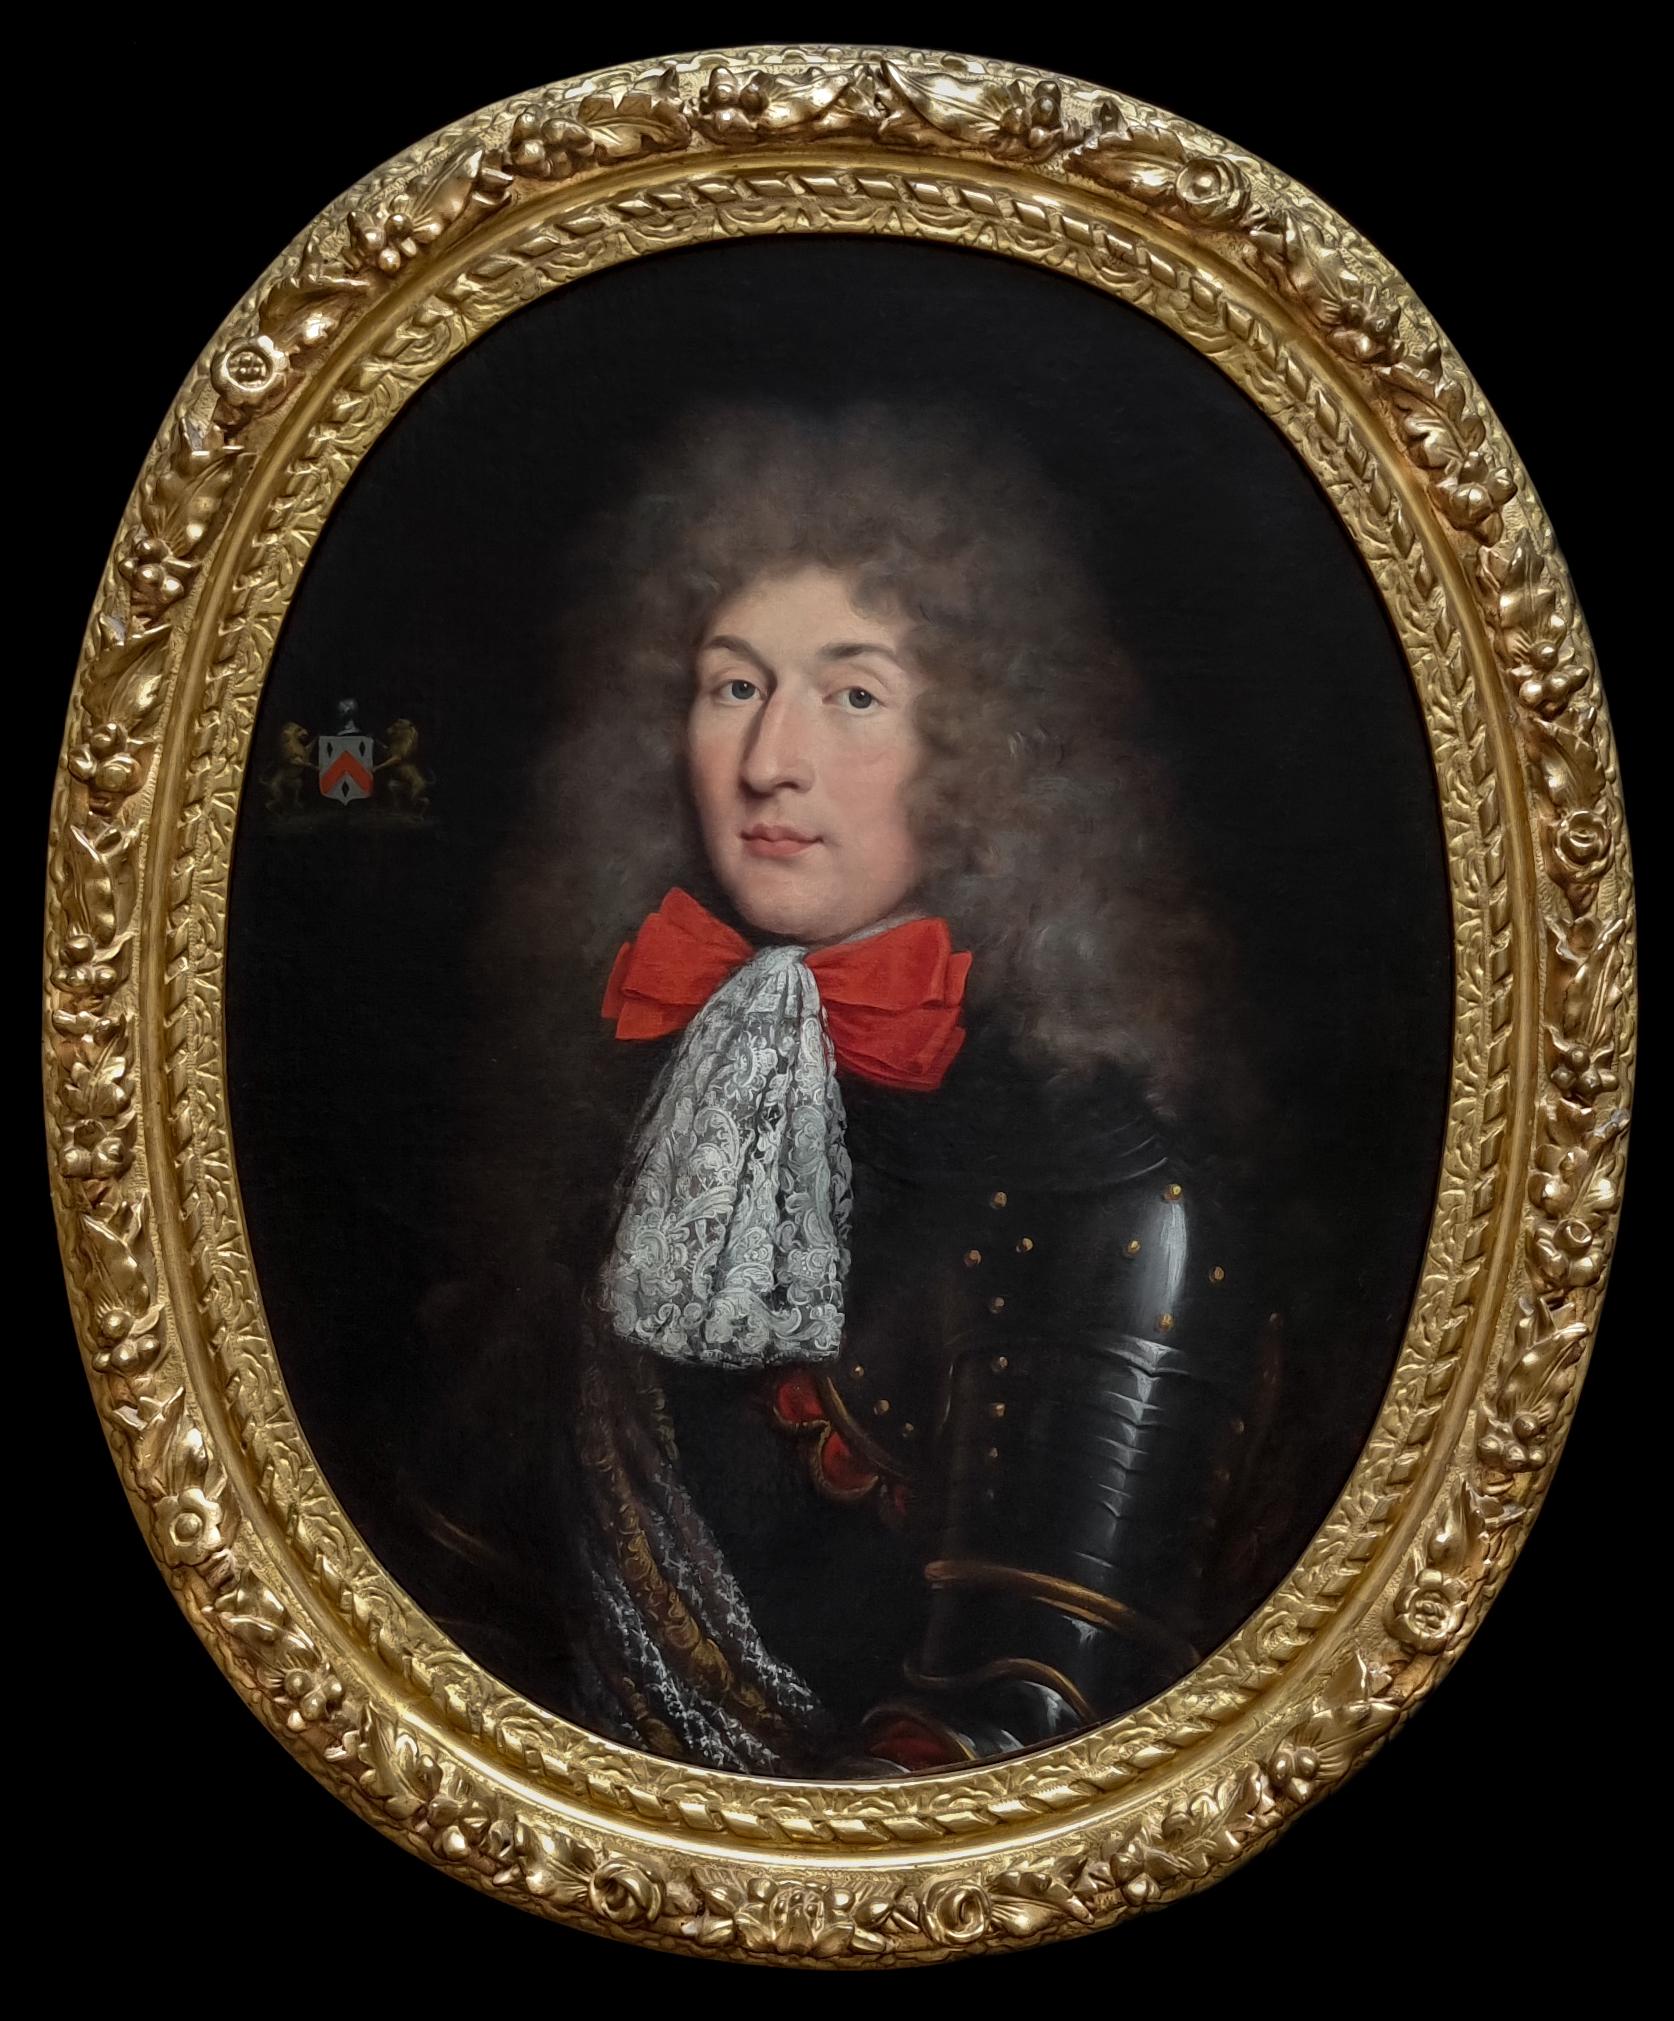 Portrait of Gentleman in Lace Cravat & Armour 1680’s Painting, Fine Carved Frame